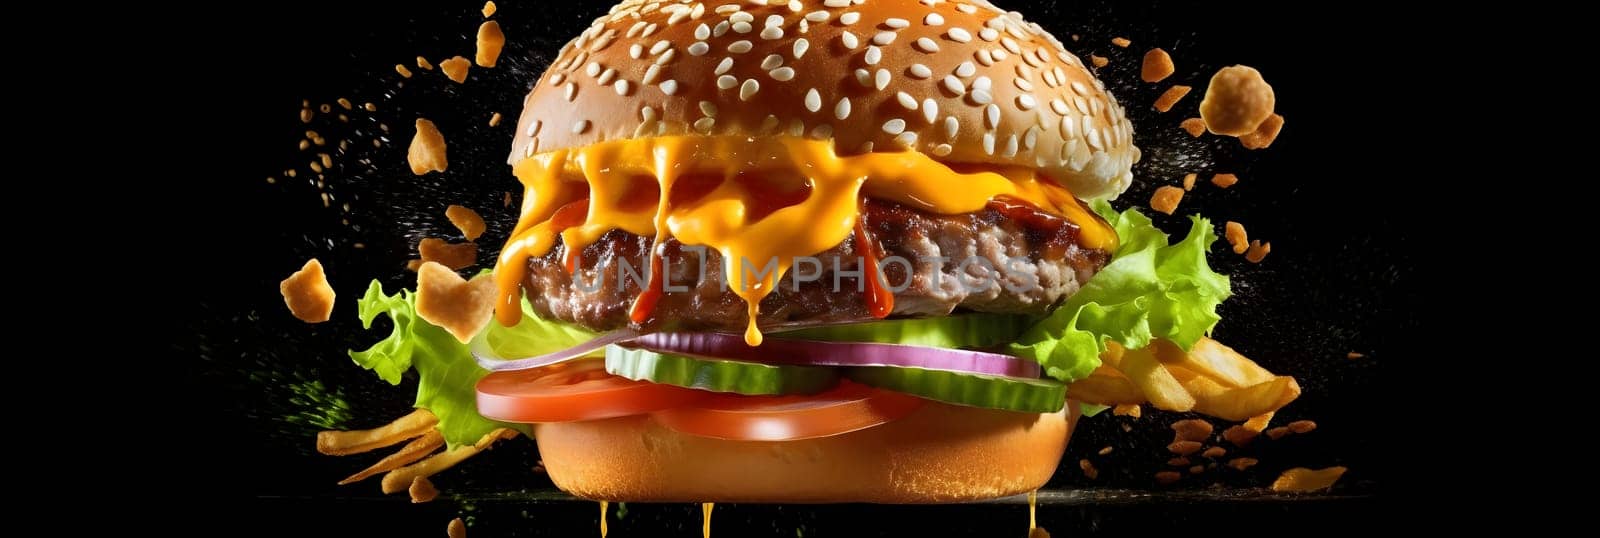 hamburger flying on black background, neural network generated photorealistic image by z1b